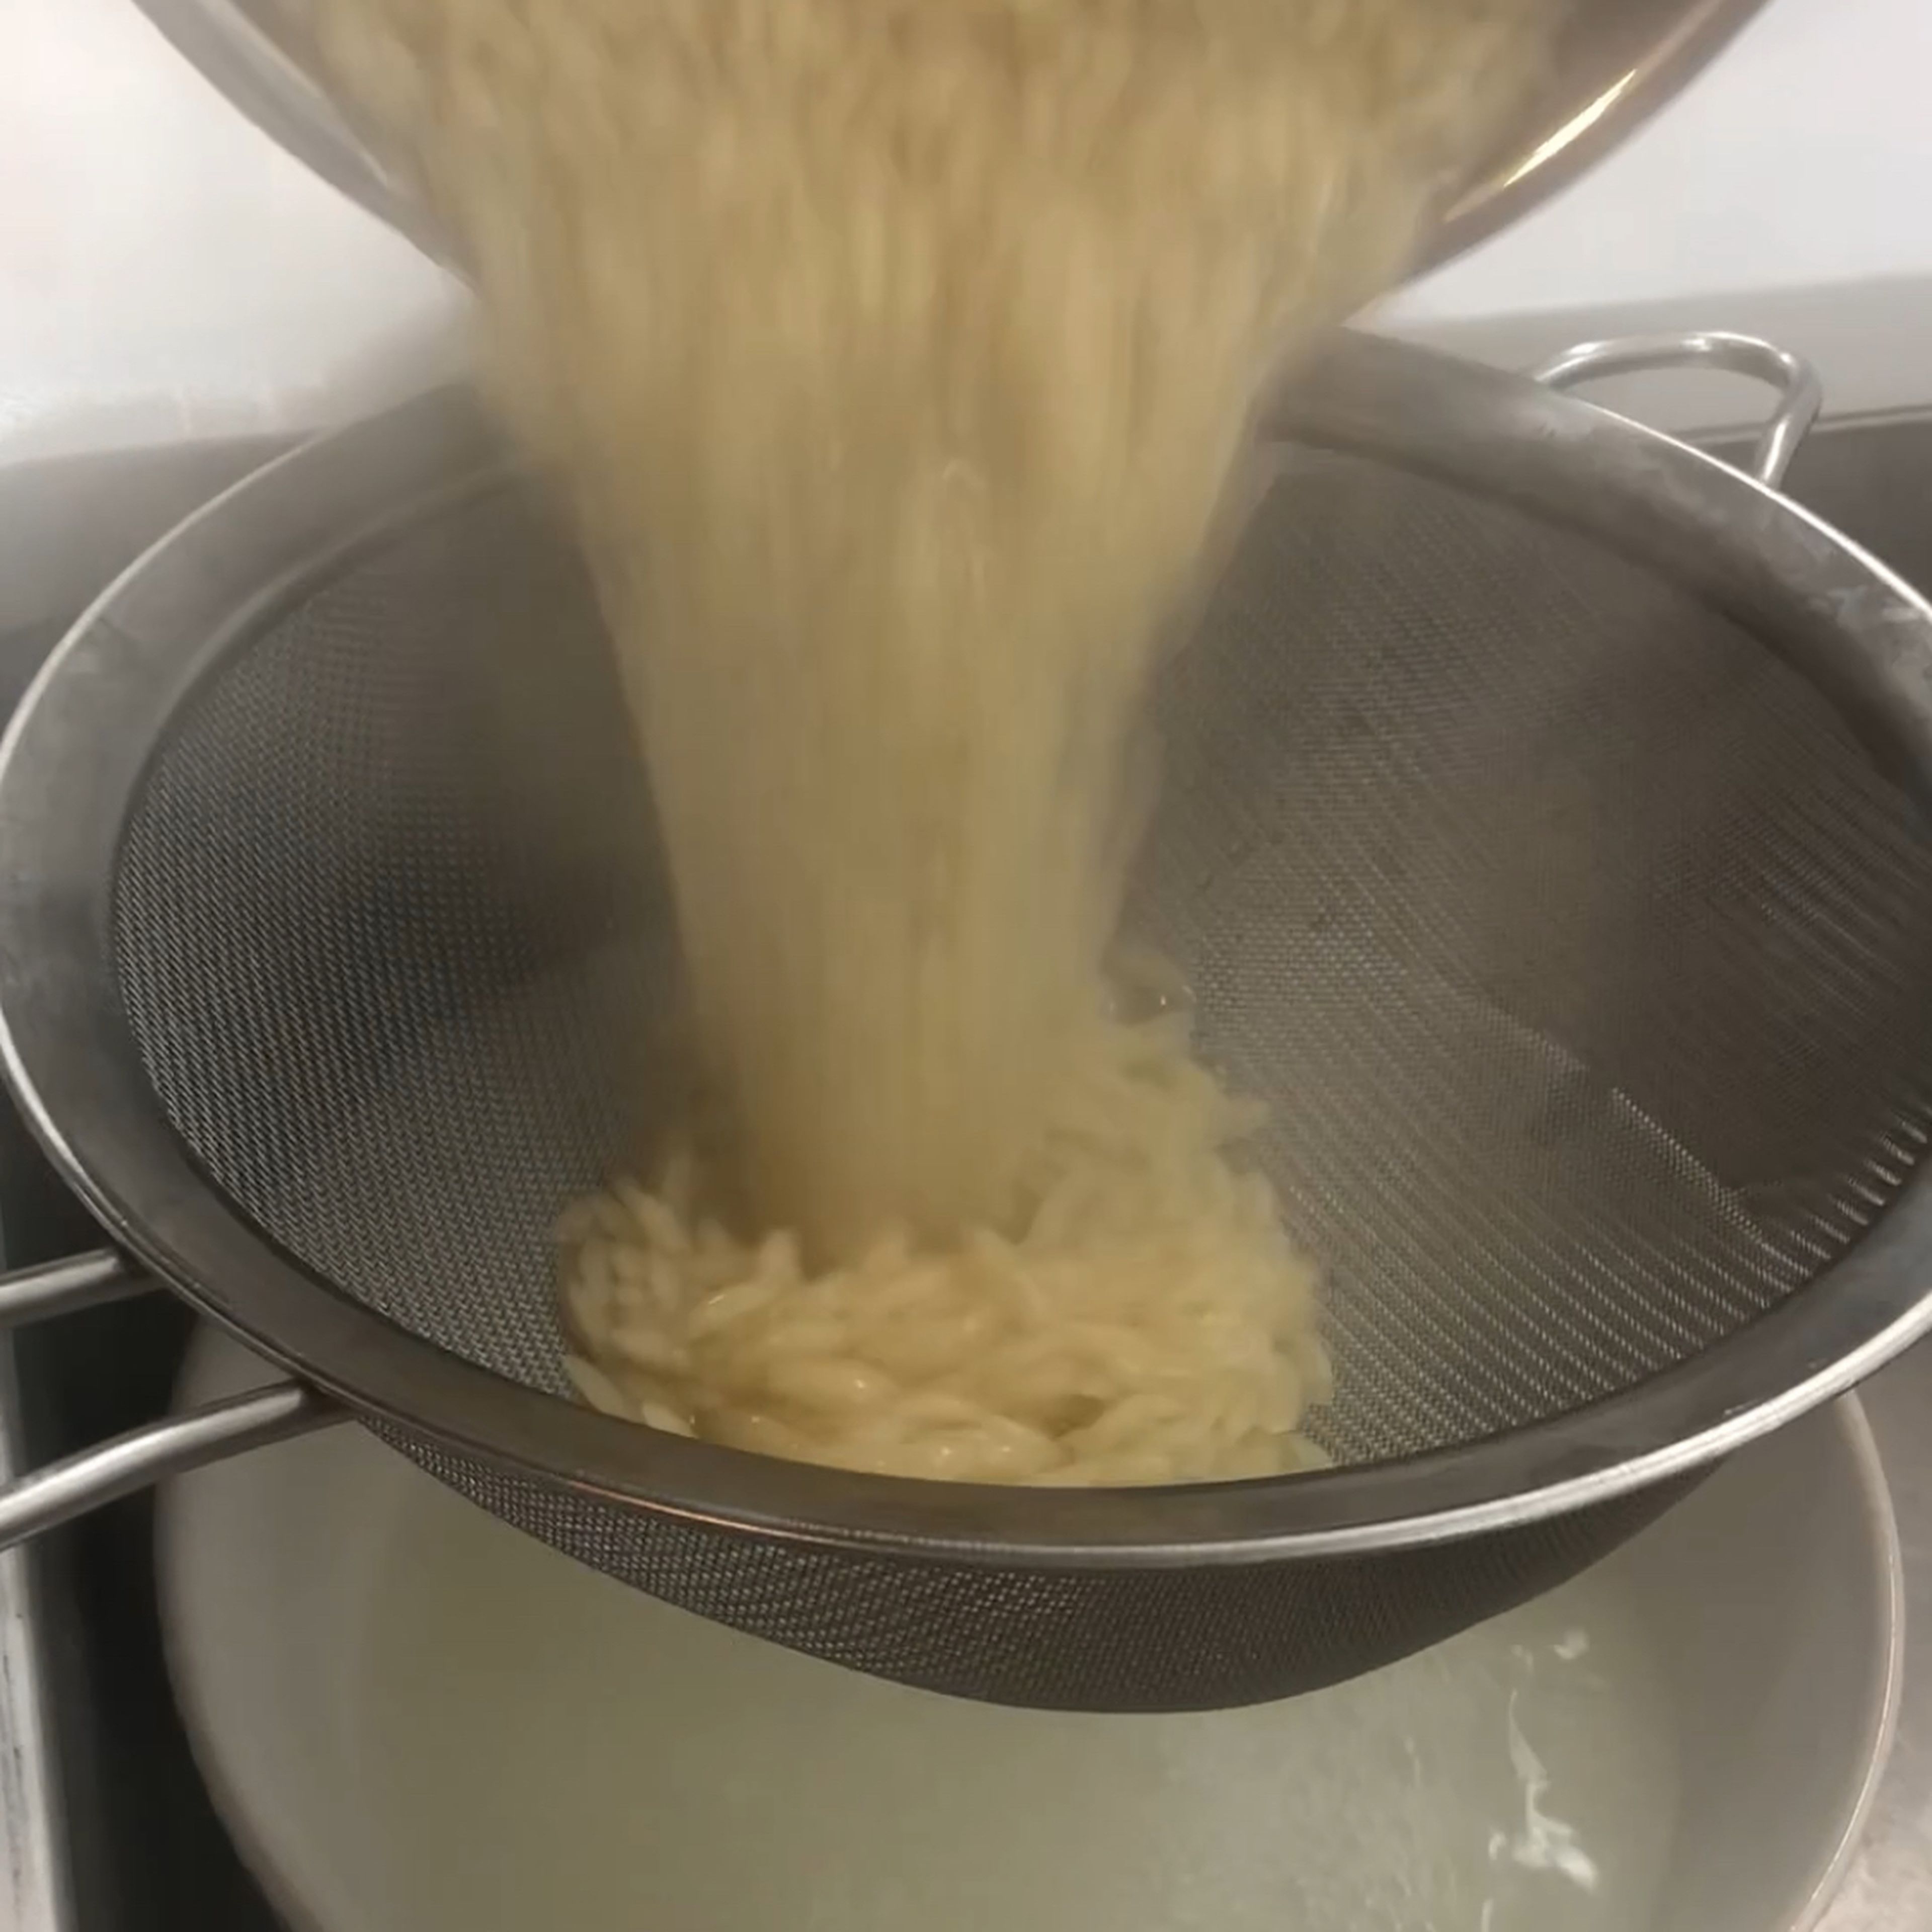 Drain the Orzo and save some of the pasta water